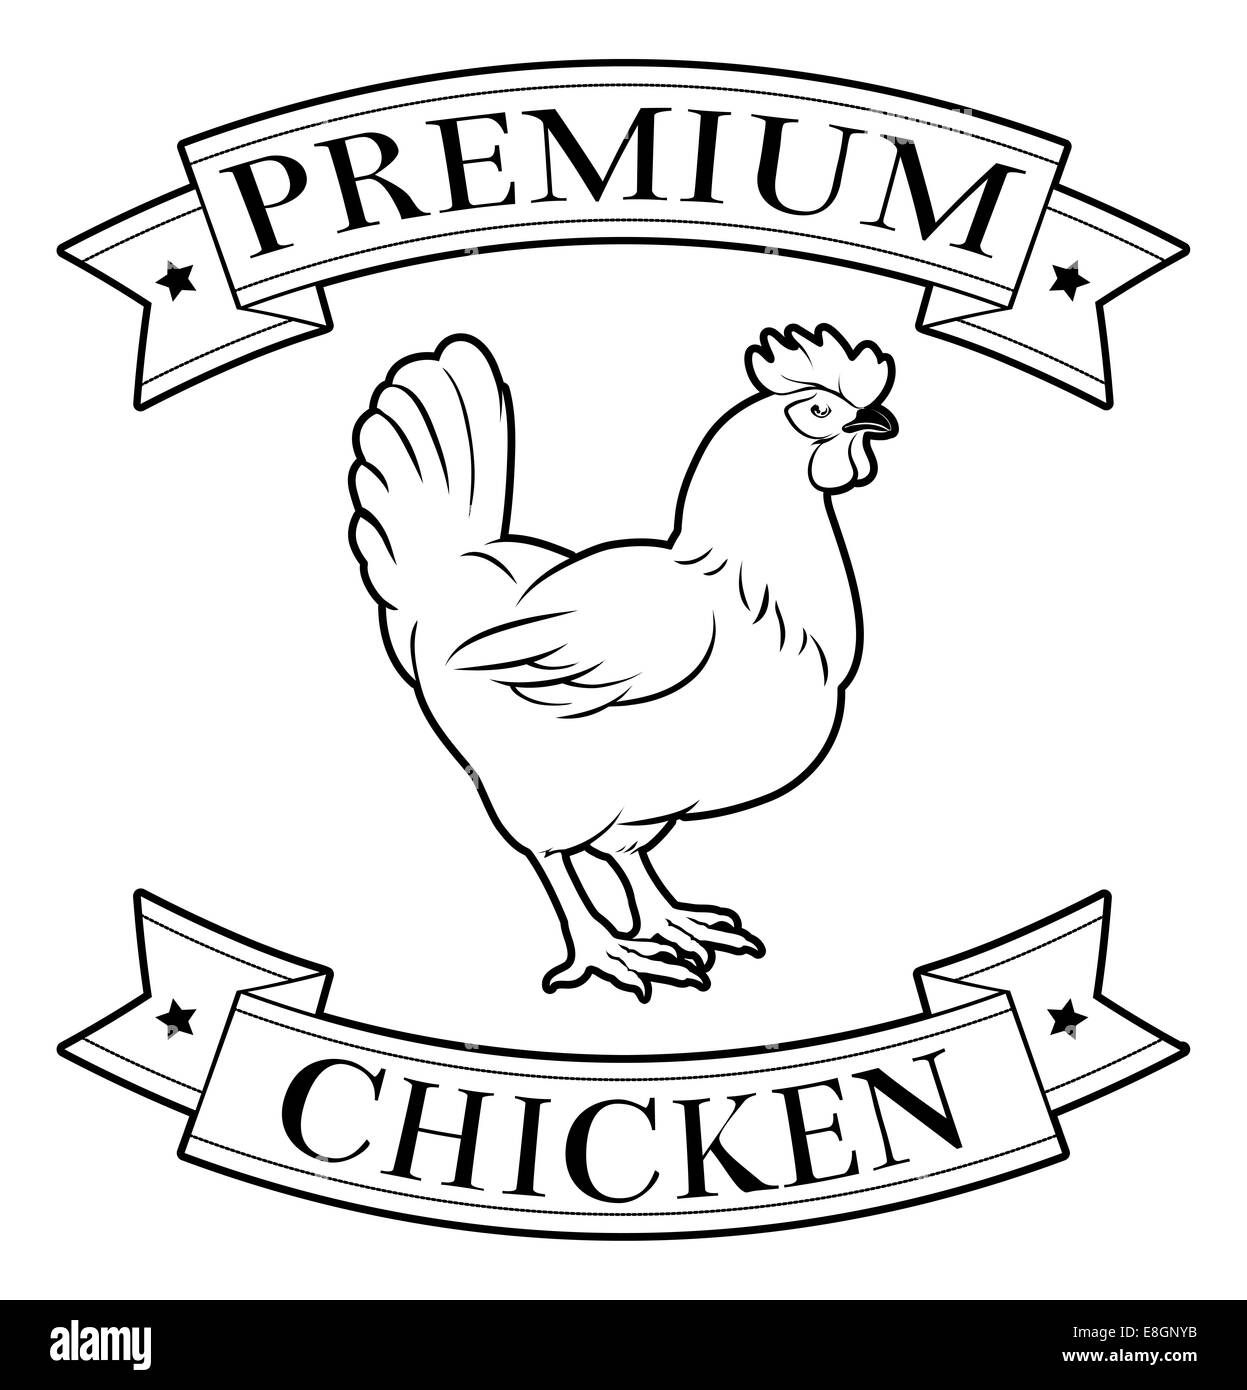 Premium chicken food label featuring an illustration of a chicken Stock Photo